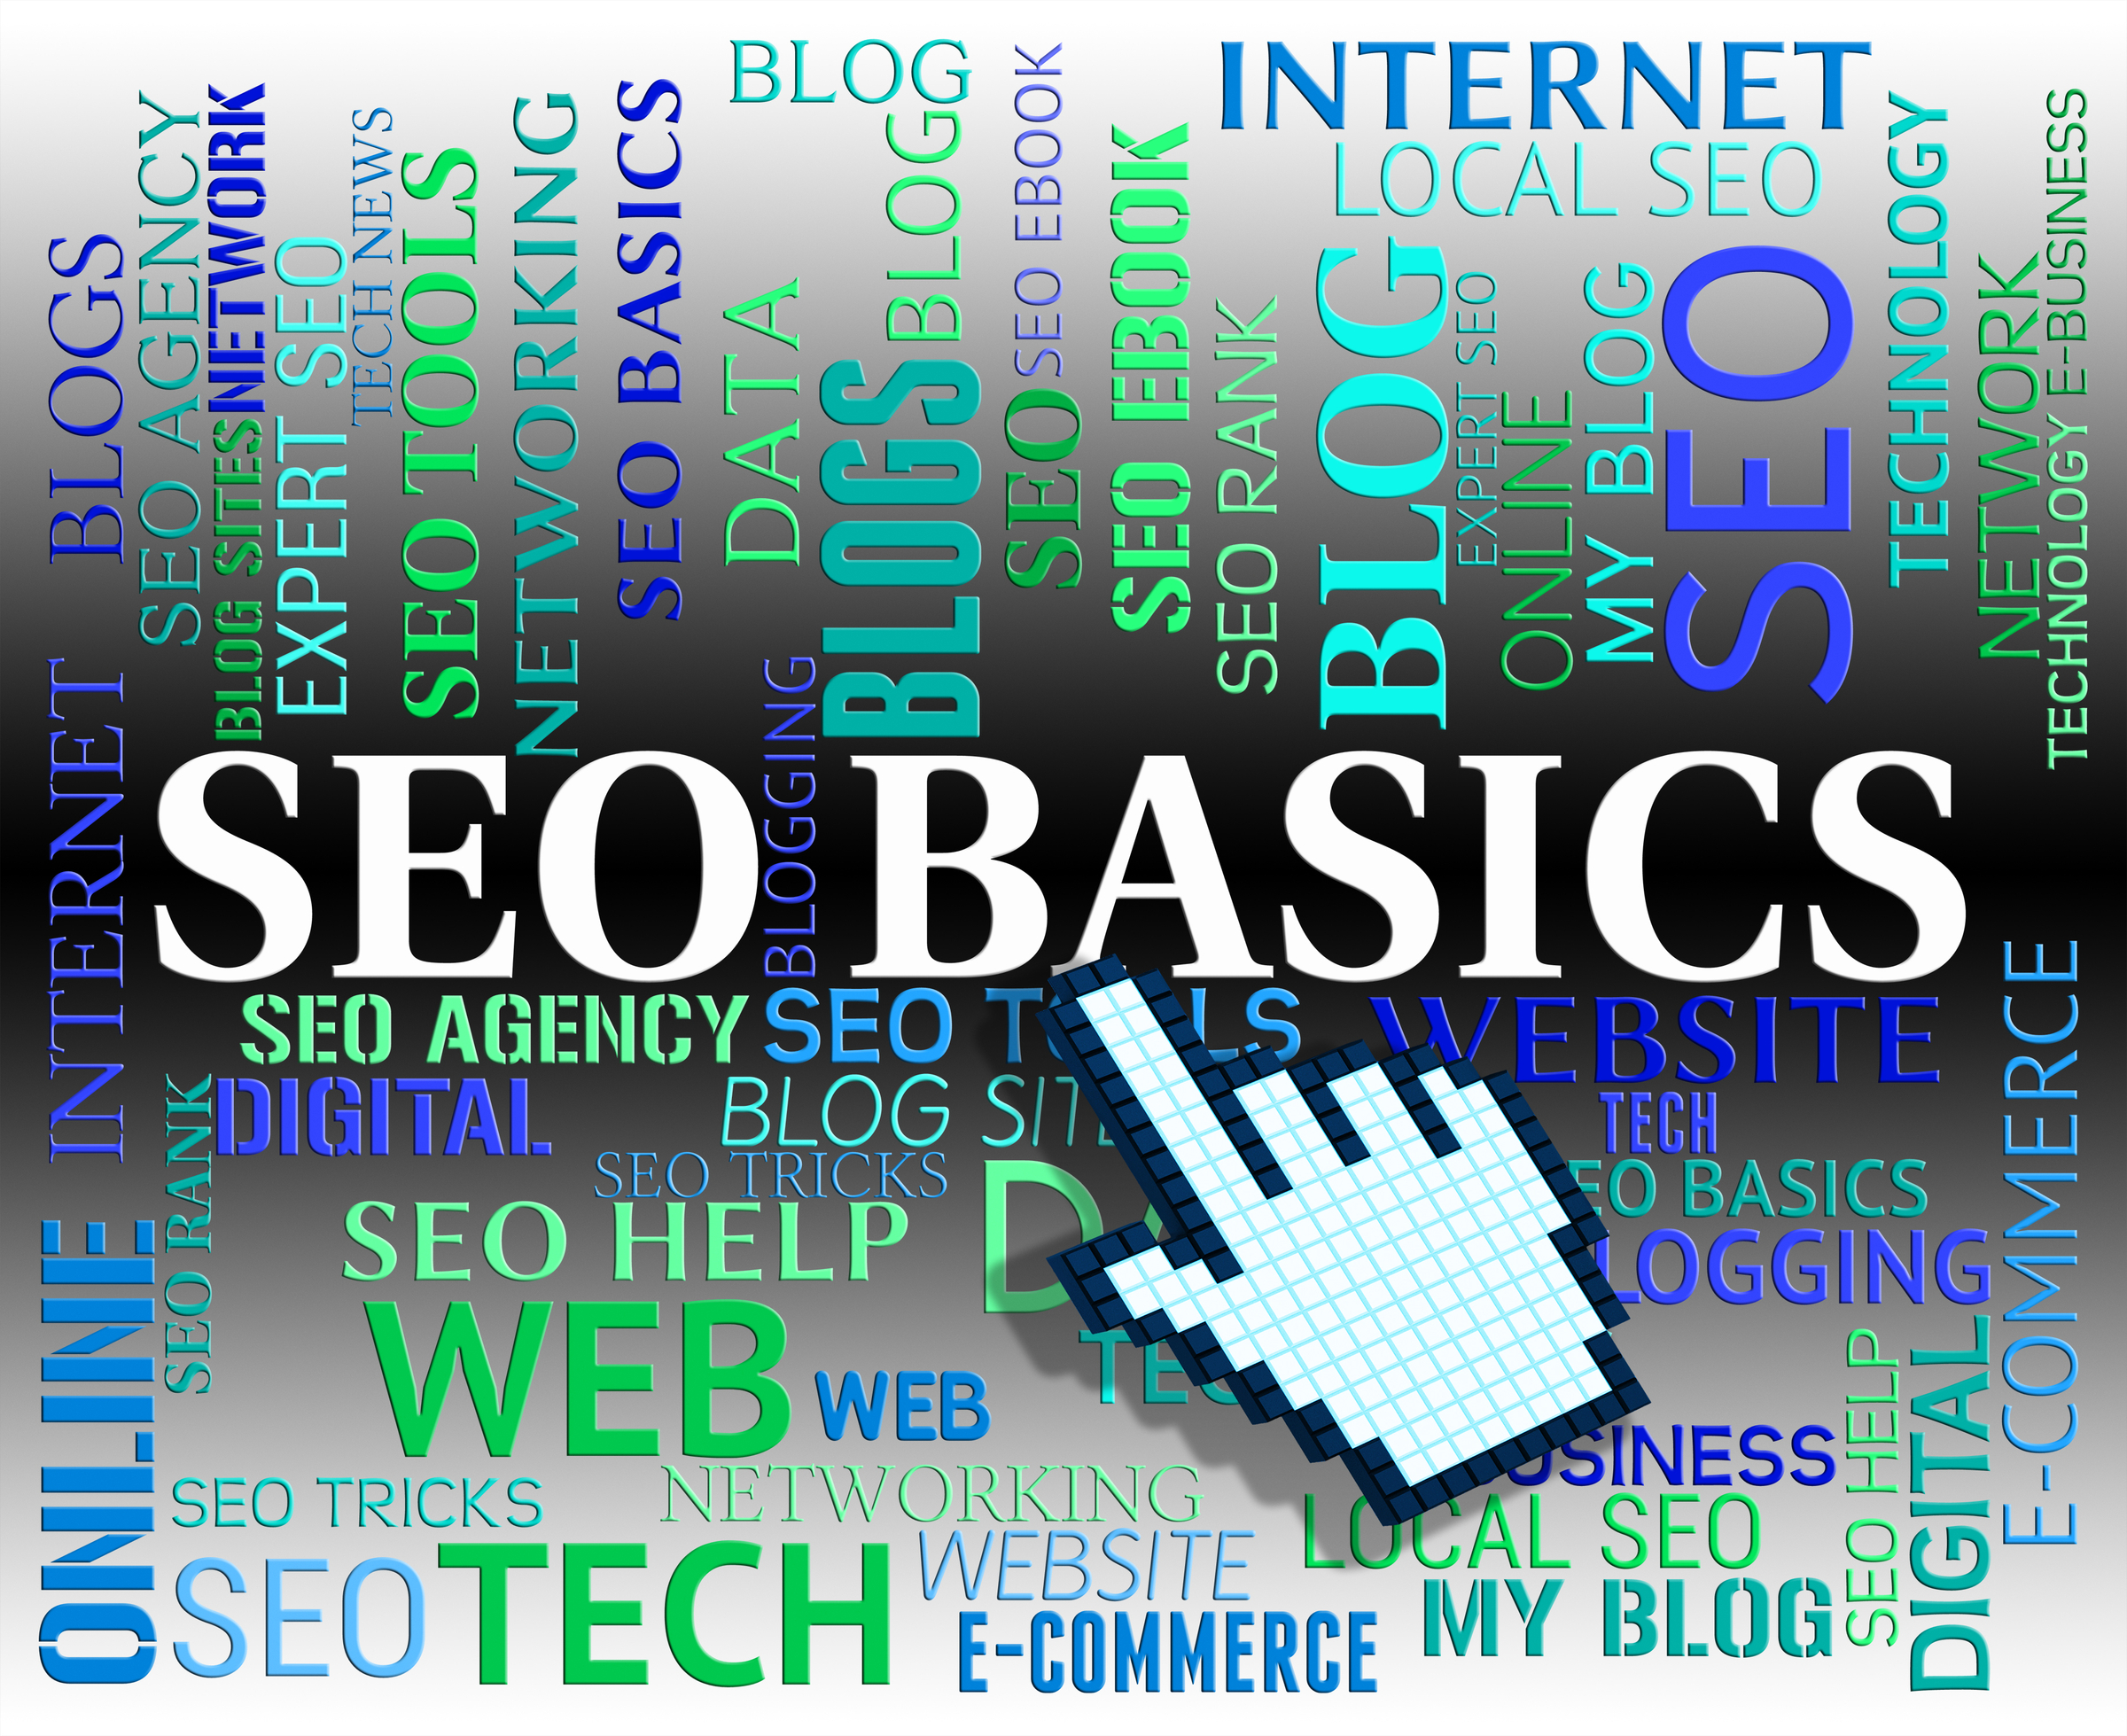 Achieving Top Search Engine Positions